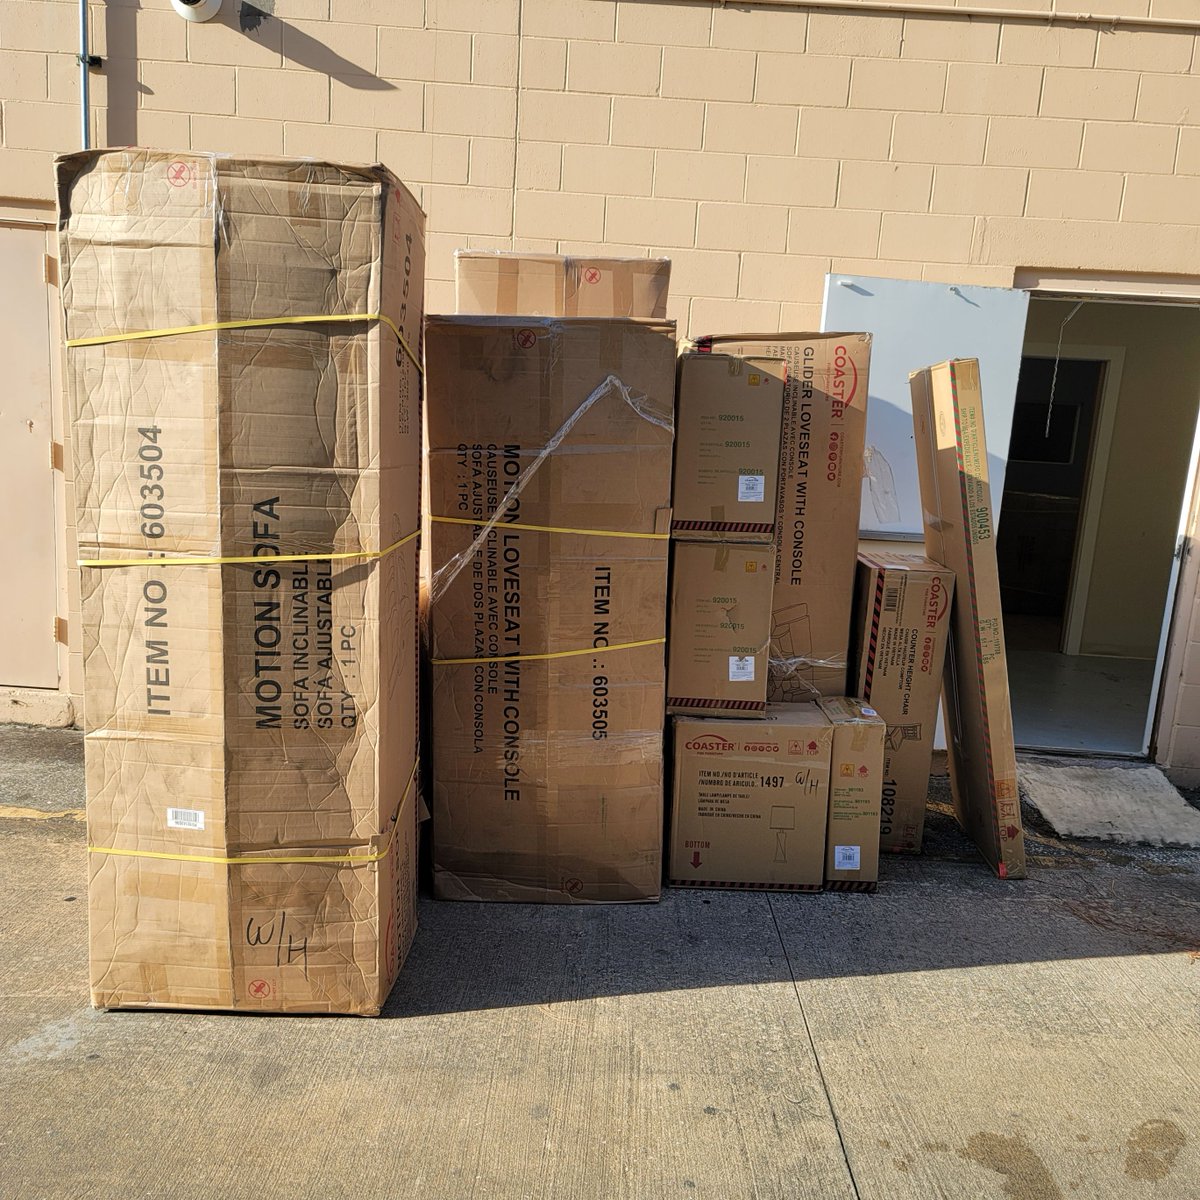 Our wonderful #products are arriving for our #GrandStoreOpening on Friday June 25th!! A lot of exciting #surprises and #prizes, win a #free #iPad, #GiftCards and a #ShoppingSpree! 3335 Tampa Road, #PalmHarbor, #FL 34694 #furniture #interiordesign 

Don't miss it!